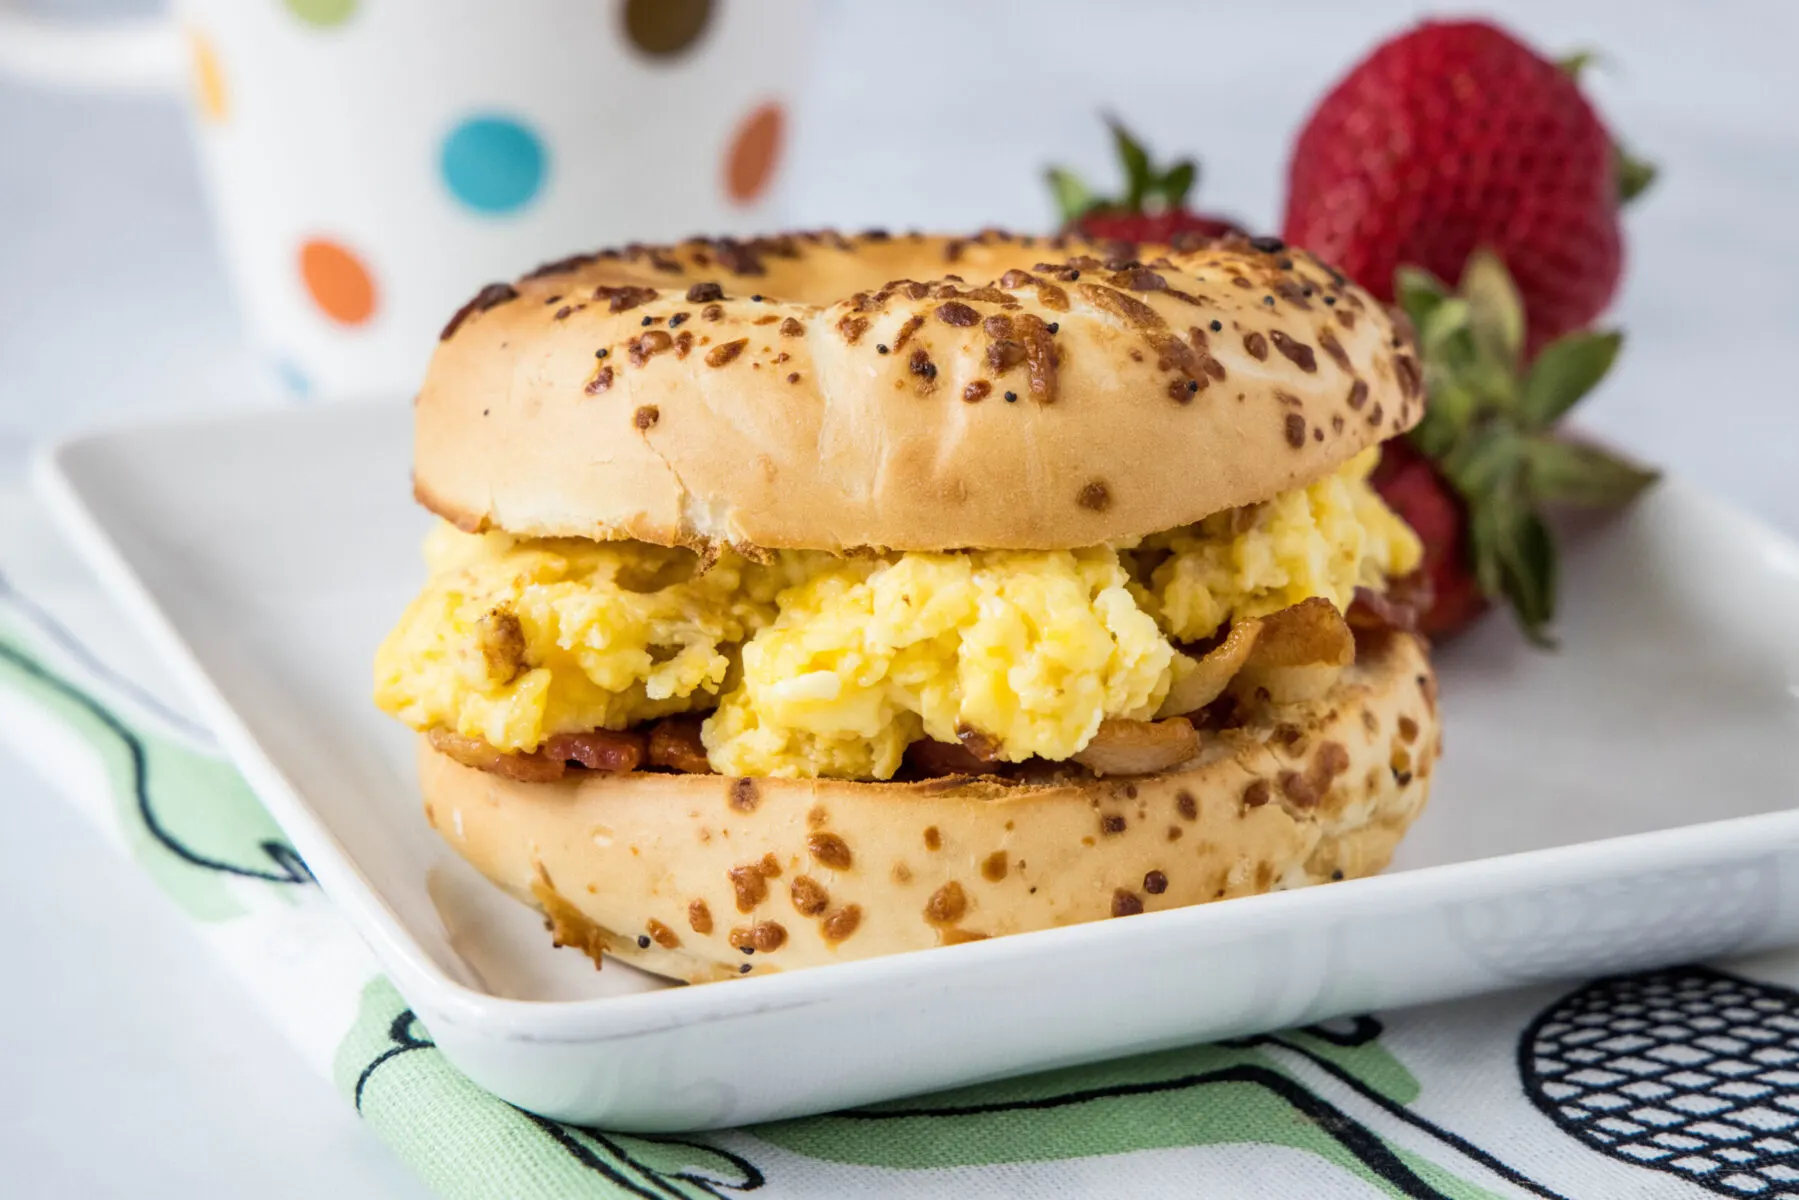 A bagel stuffed with eggs and bacon on a plate with strawberries and a mug in the background